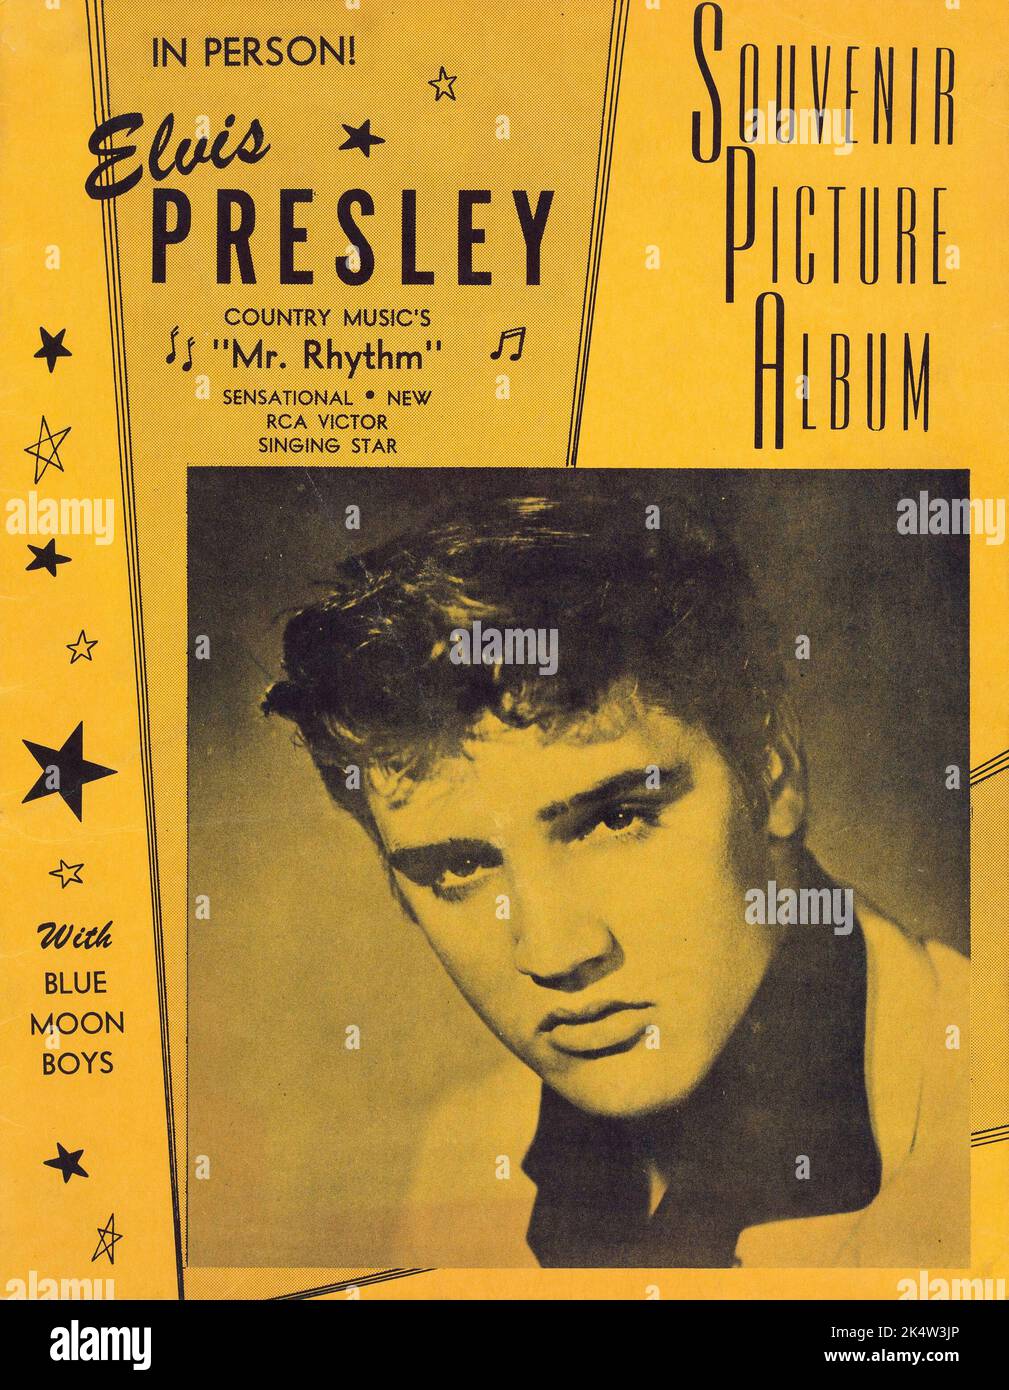 Tonight only, Tupelo's own Elvis Presley - 1957 Tupelo, MS Homecoming Concert Poster, Fairgrounds. Stock Photo